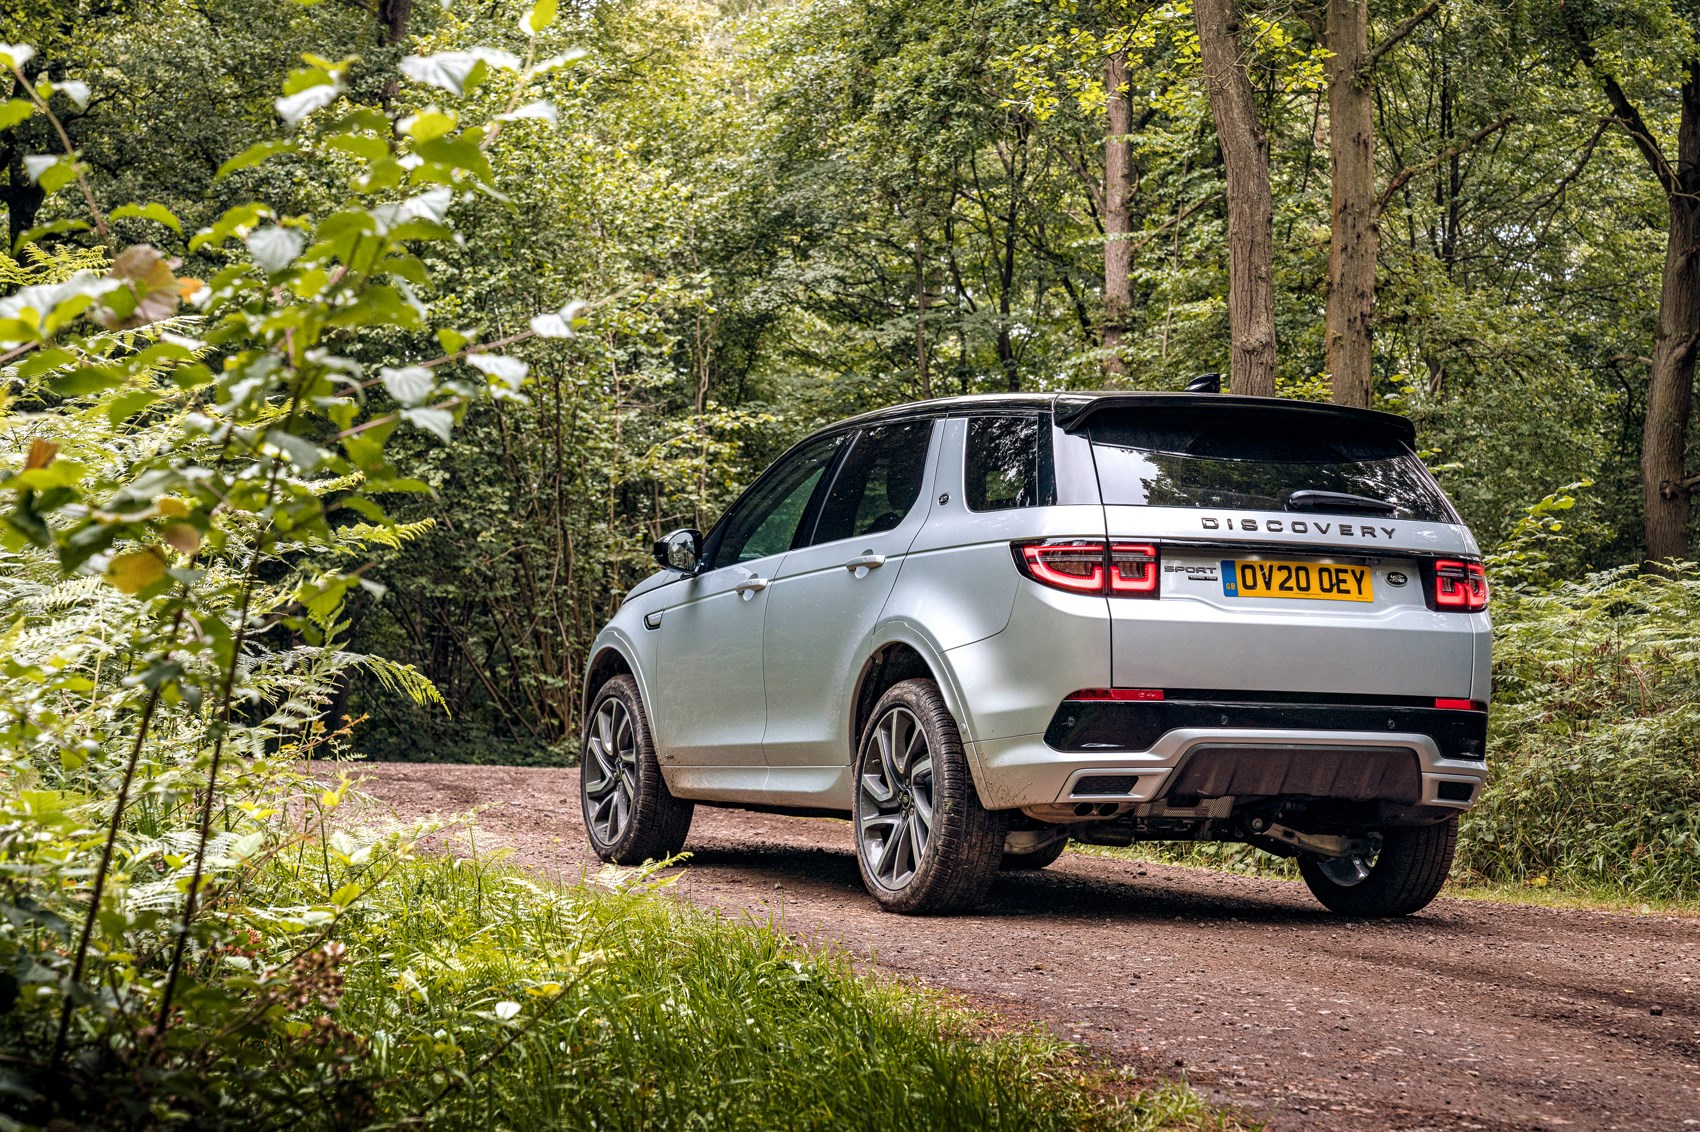 2020 Land Rover Discovery Sport review: Not much more than a